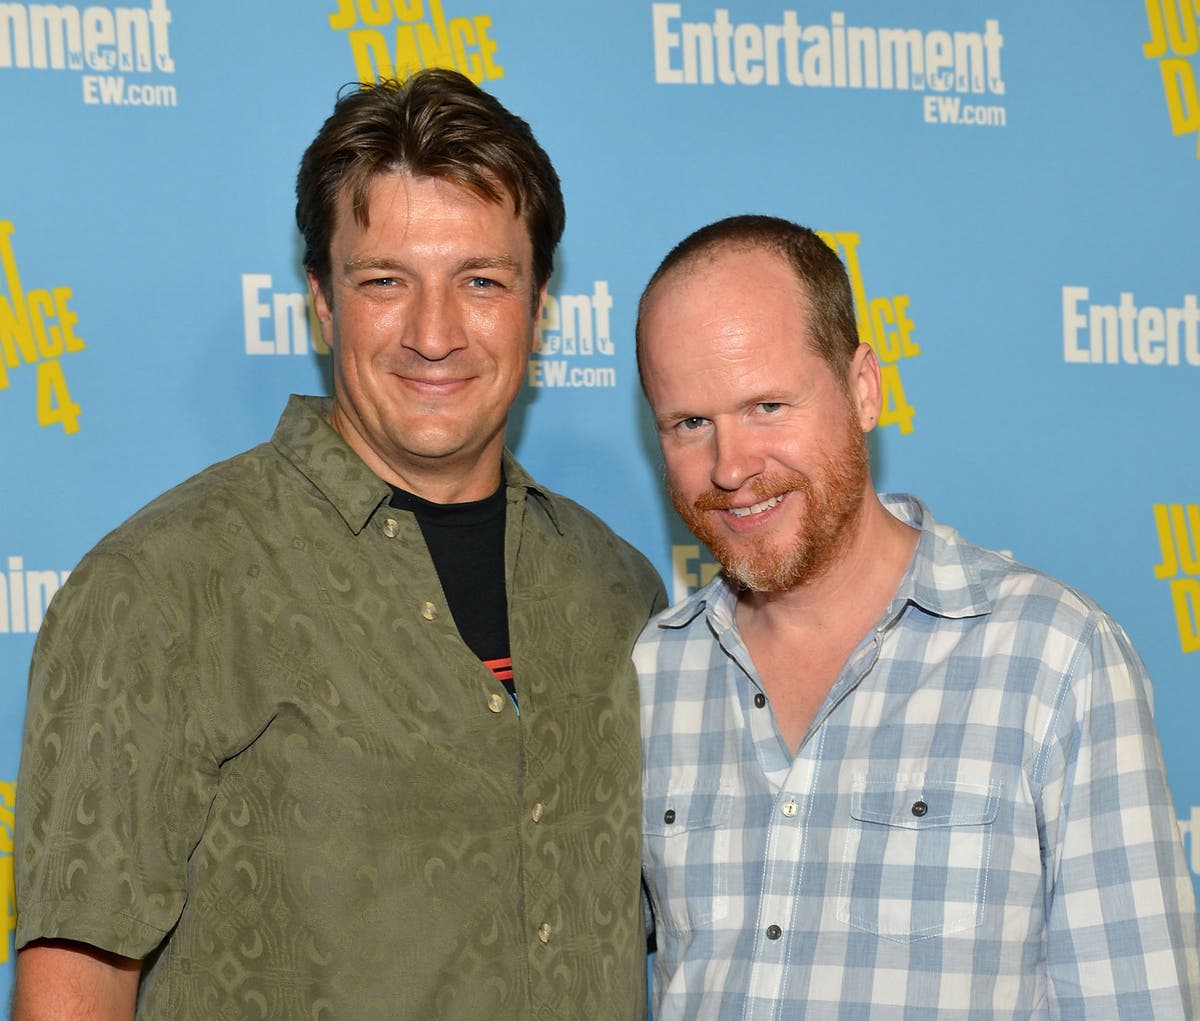 Nathan Fillion defends Joss Whedon: ‘I would work with him again in a second’